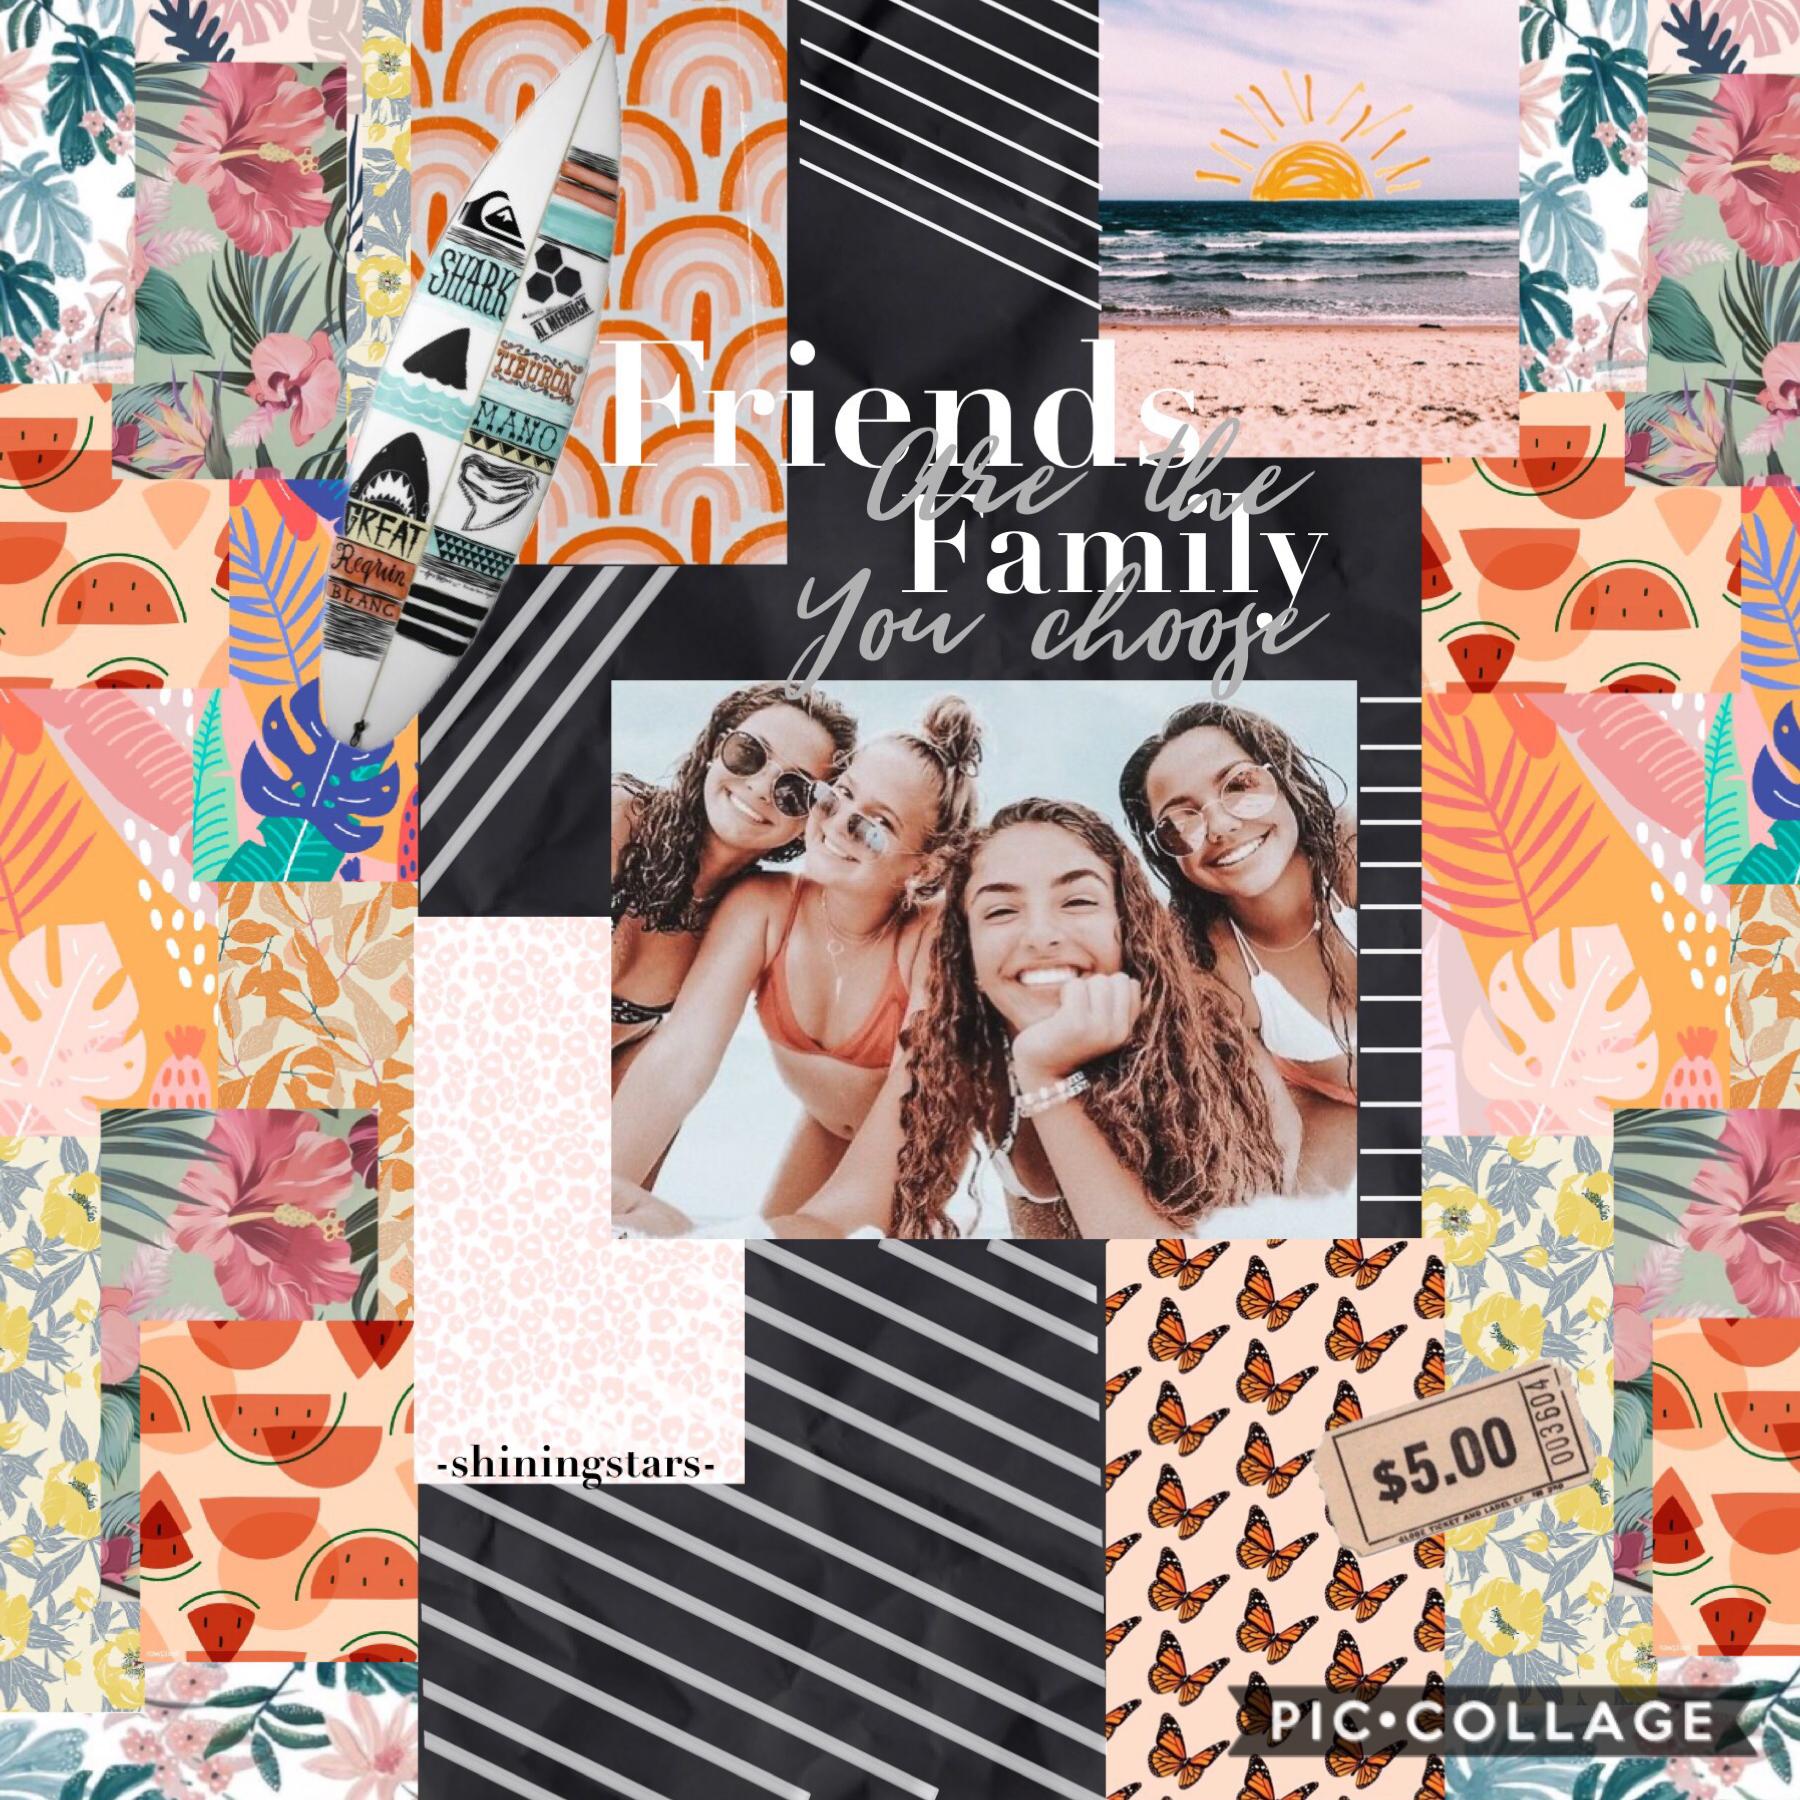 👯‍♀️TAP👯‍♀️

hey ⭐️ STARS ⭐️! another collage for you guys!
The theme is friends and credit to 
@sparklydiamonds for the background!
Comment who is your BFF on PC 💕 
